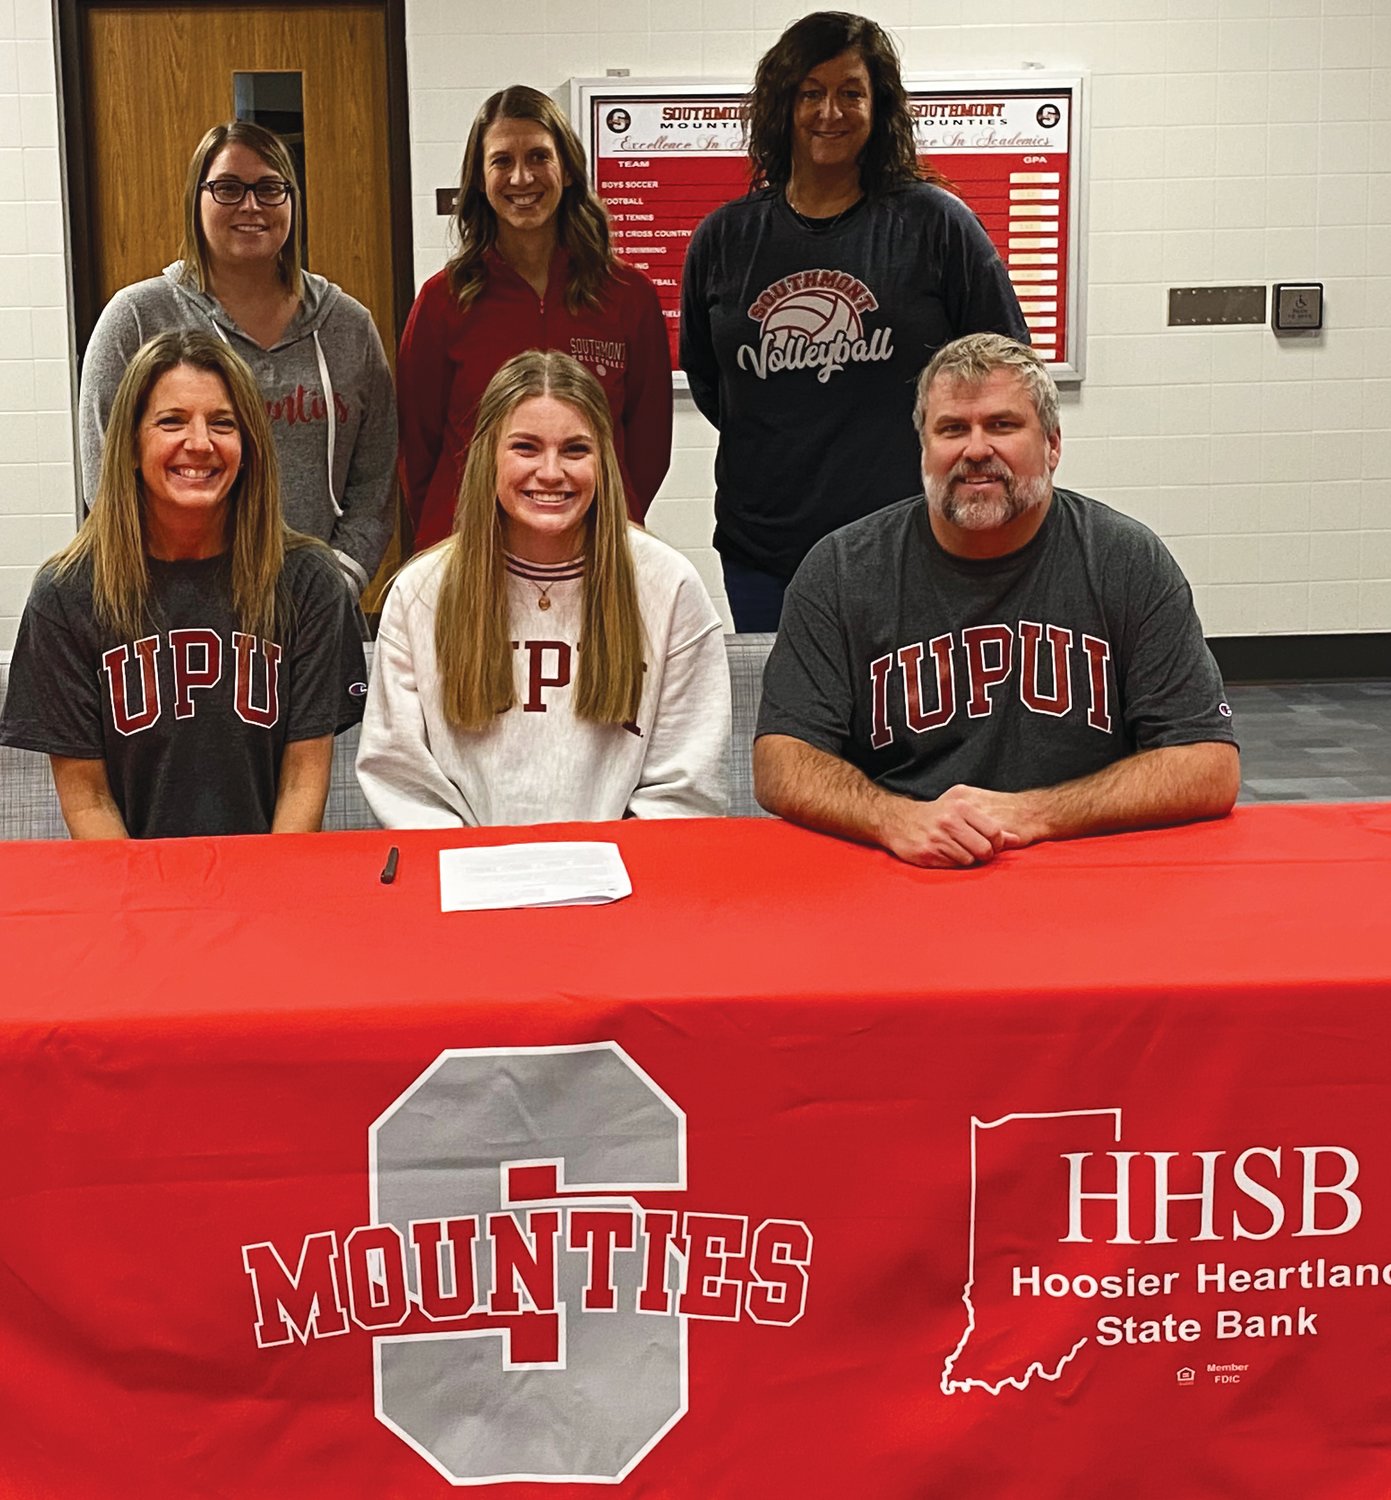 Sidney Veatch will continue her volleyball career at IUPUI. The Southmont senior is joined by her parents, Jenny and Tim Veatch, and Southmont coaches Erin Berry, Lauran Nichols, and Casey Harvey.